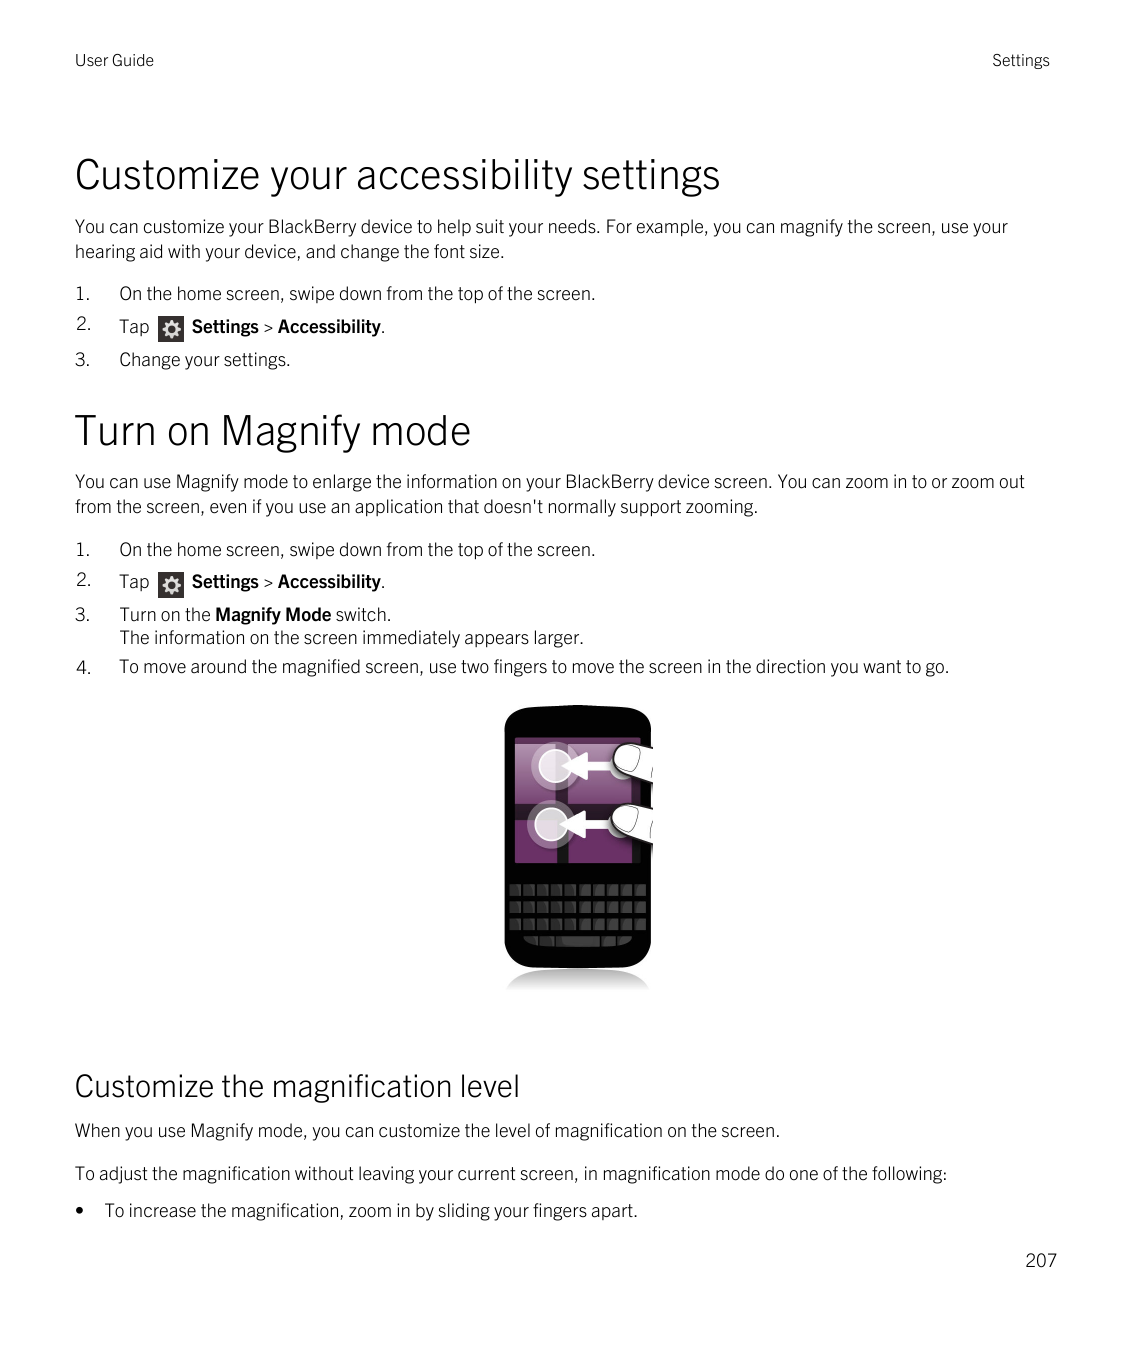 User GuideSettingsCustomize your accessibility settingsYou can customize your BlackBerry device to help suit your needs. For exa